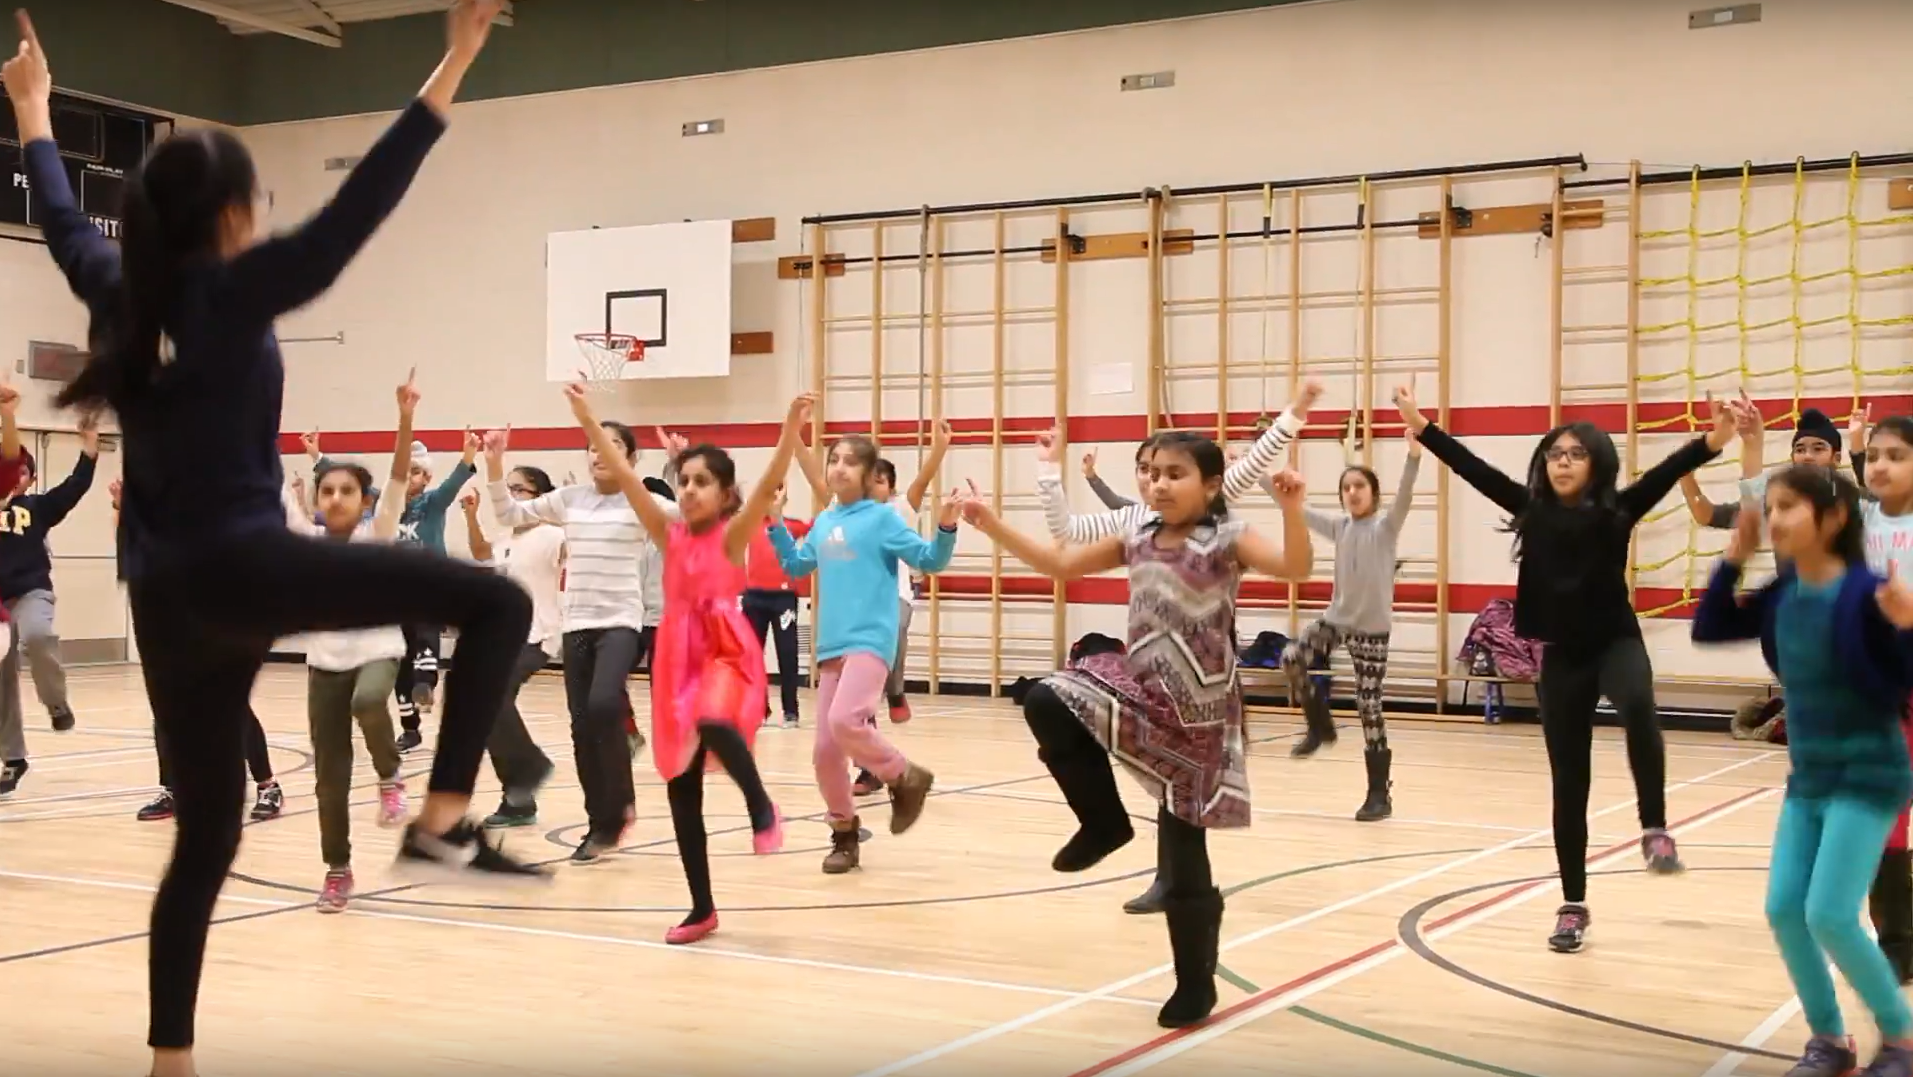 For seven months, Bhangra dance sessions were offered twice a week as a culturally appropriate cardio exercise for South Asian children in B.C.